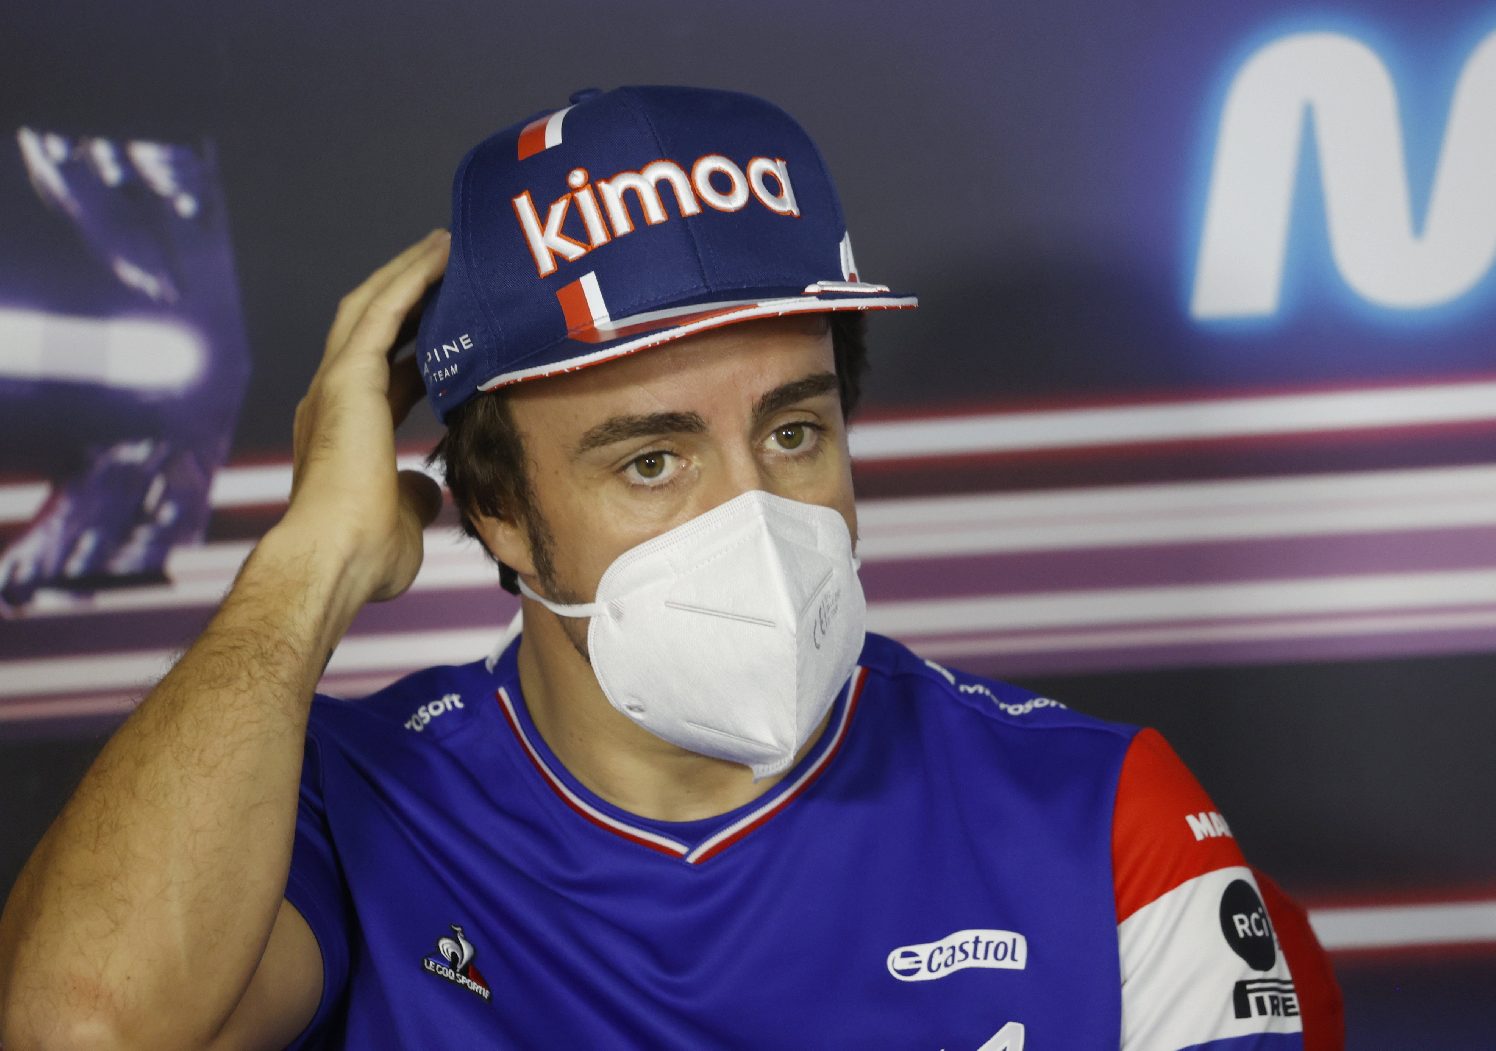 Alonso's fashion brand is spinning, and the two-time Formula 1 world champion has felt a loss